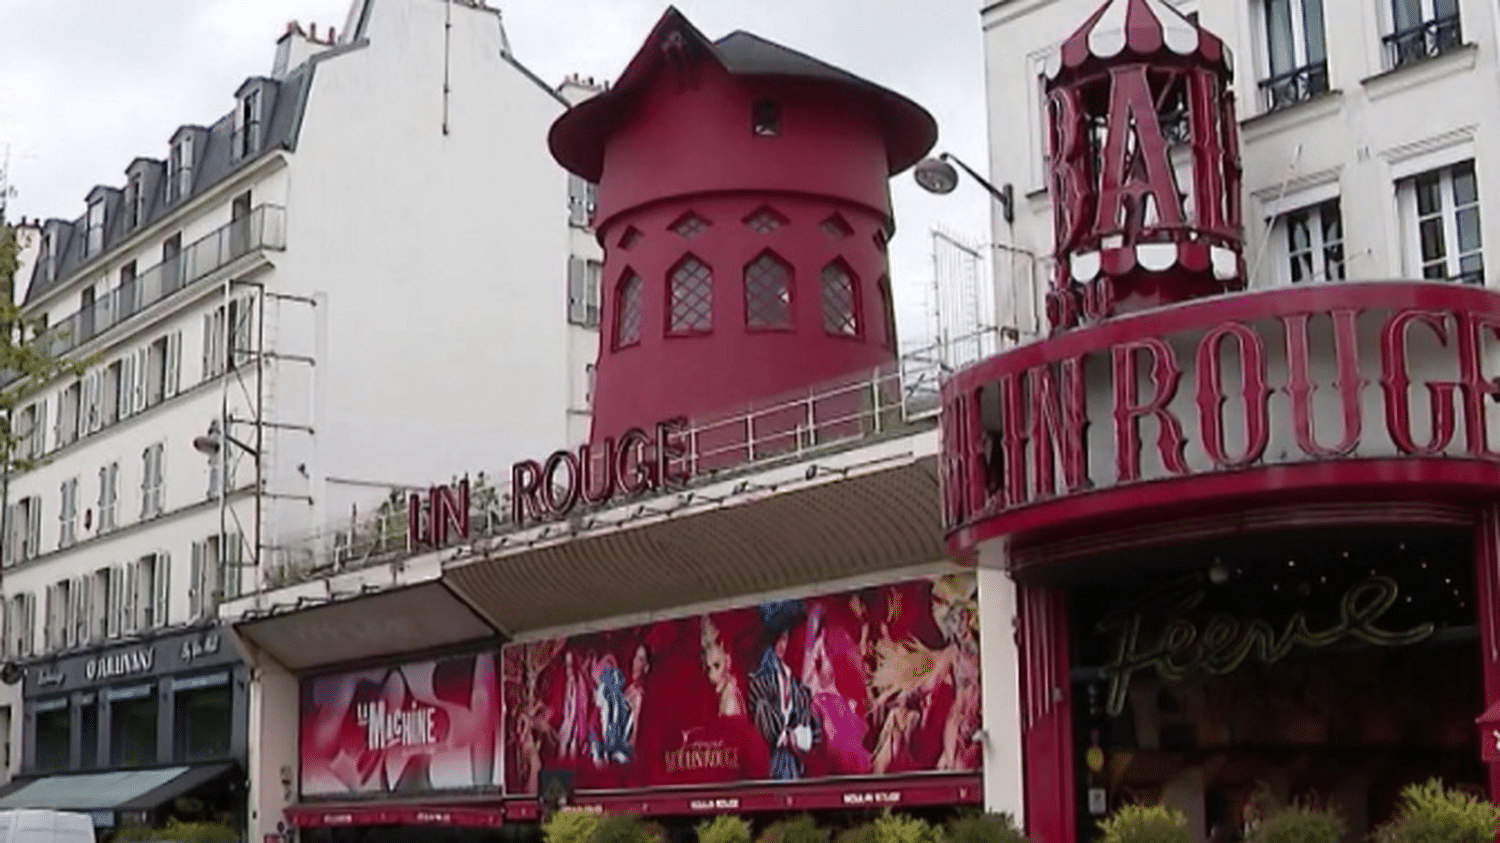 Moulin Rouge: the famous Parisian cabaret has lost its wings